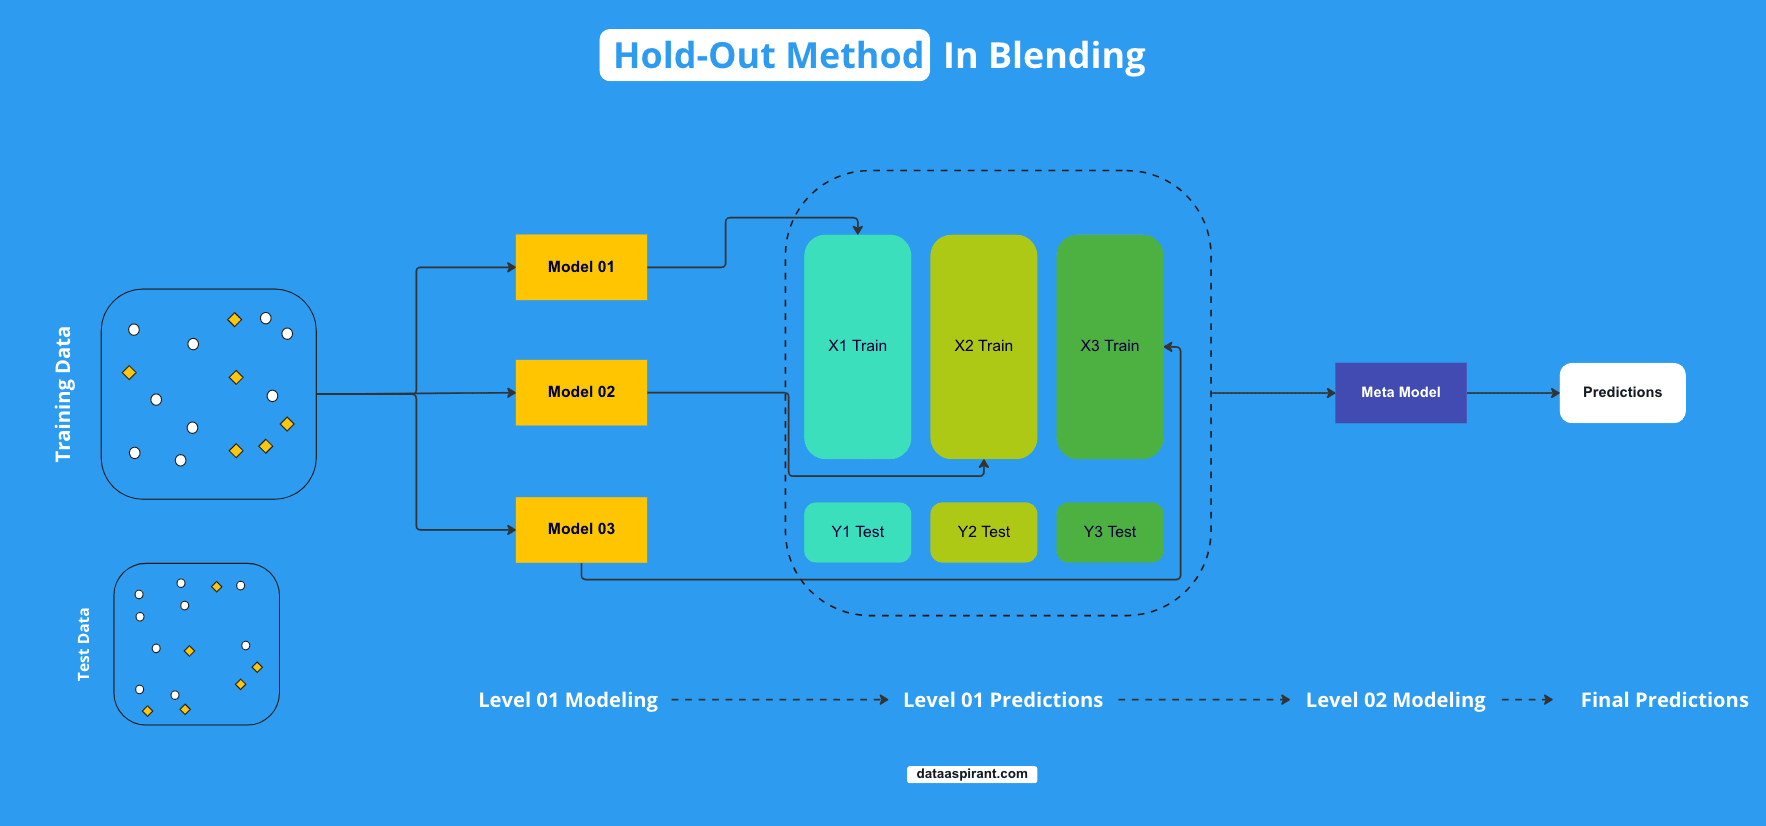 Hold-Out Method in Blending